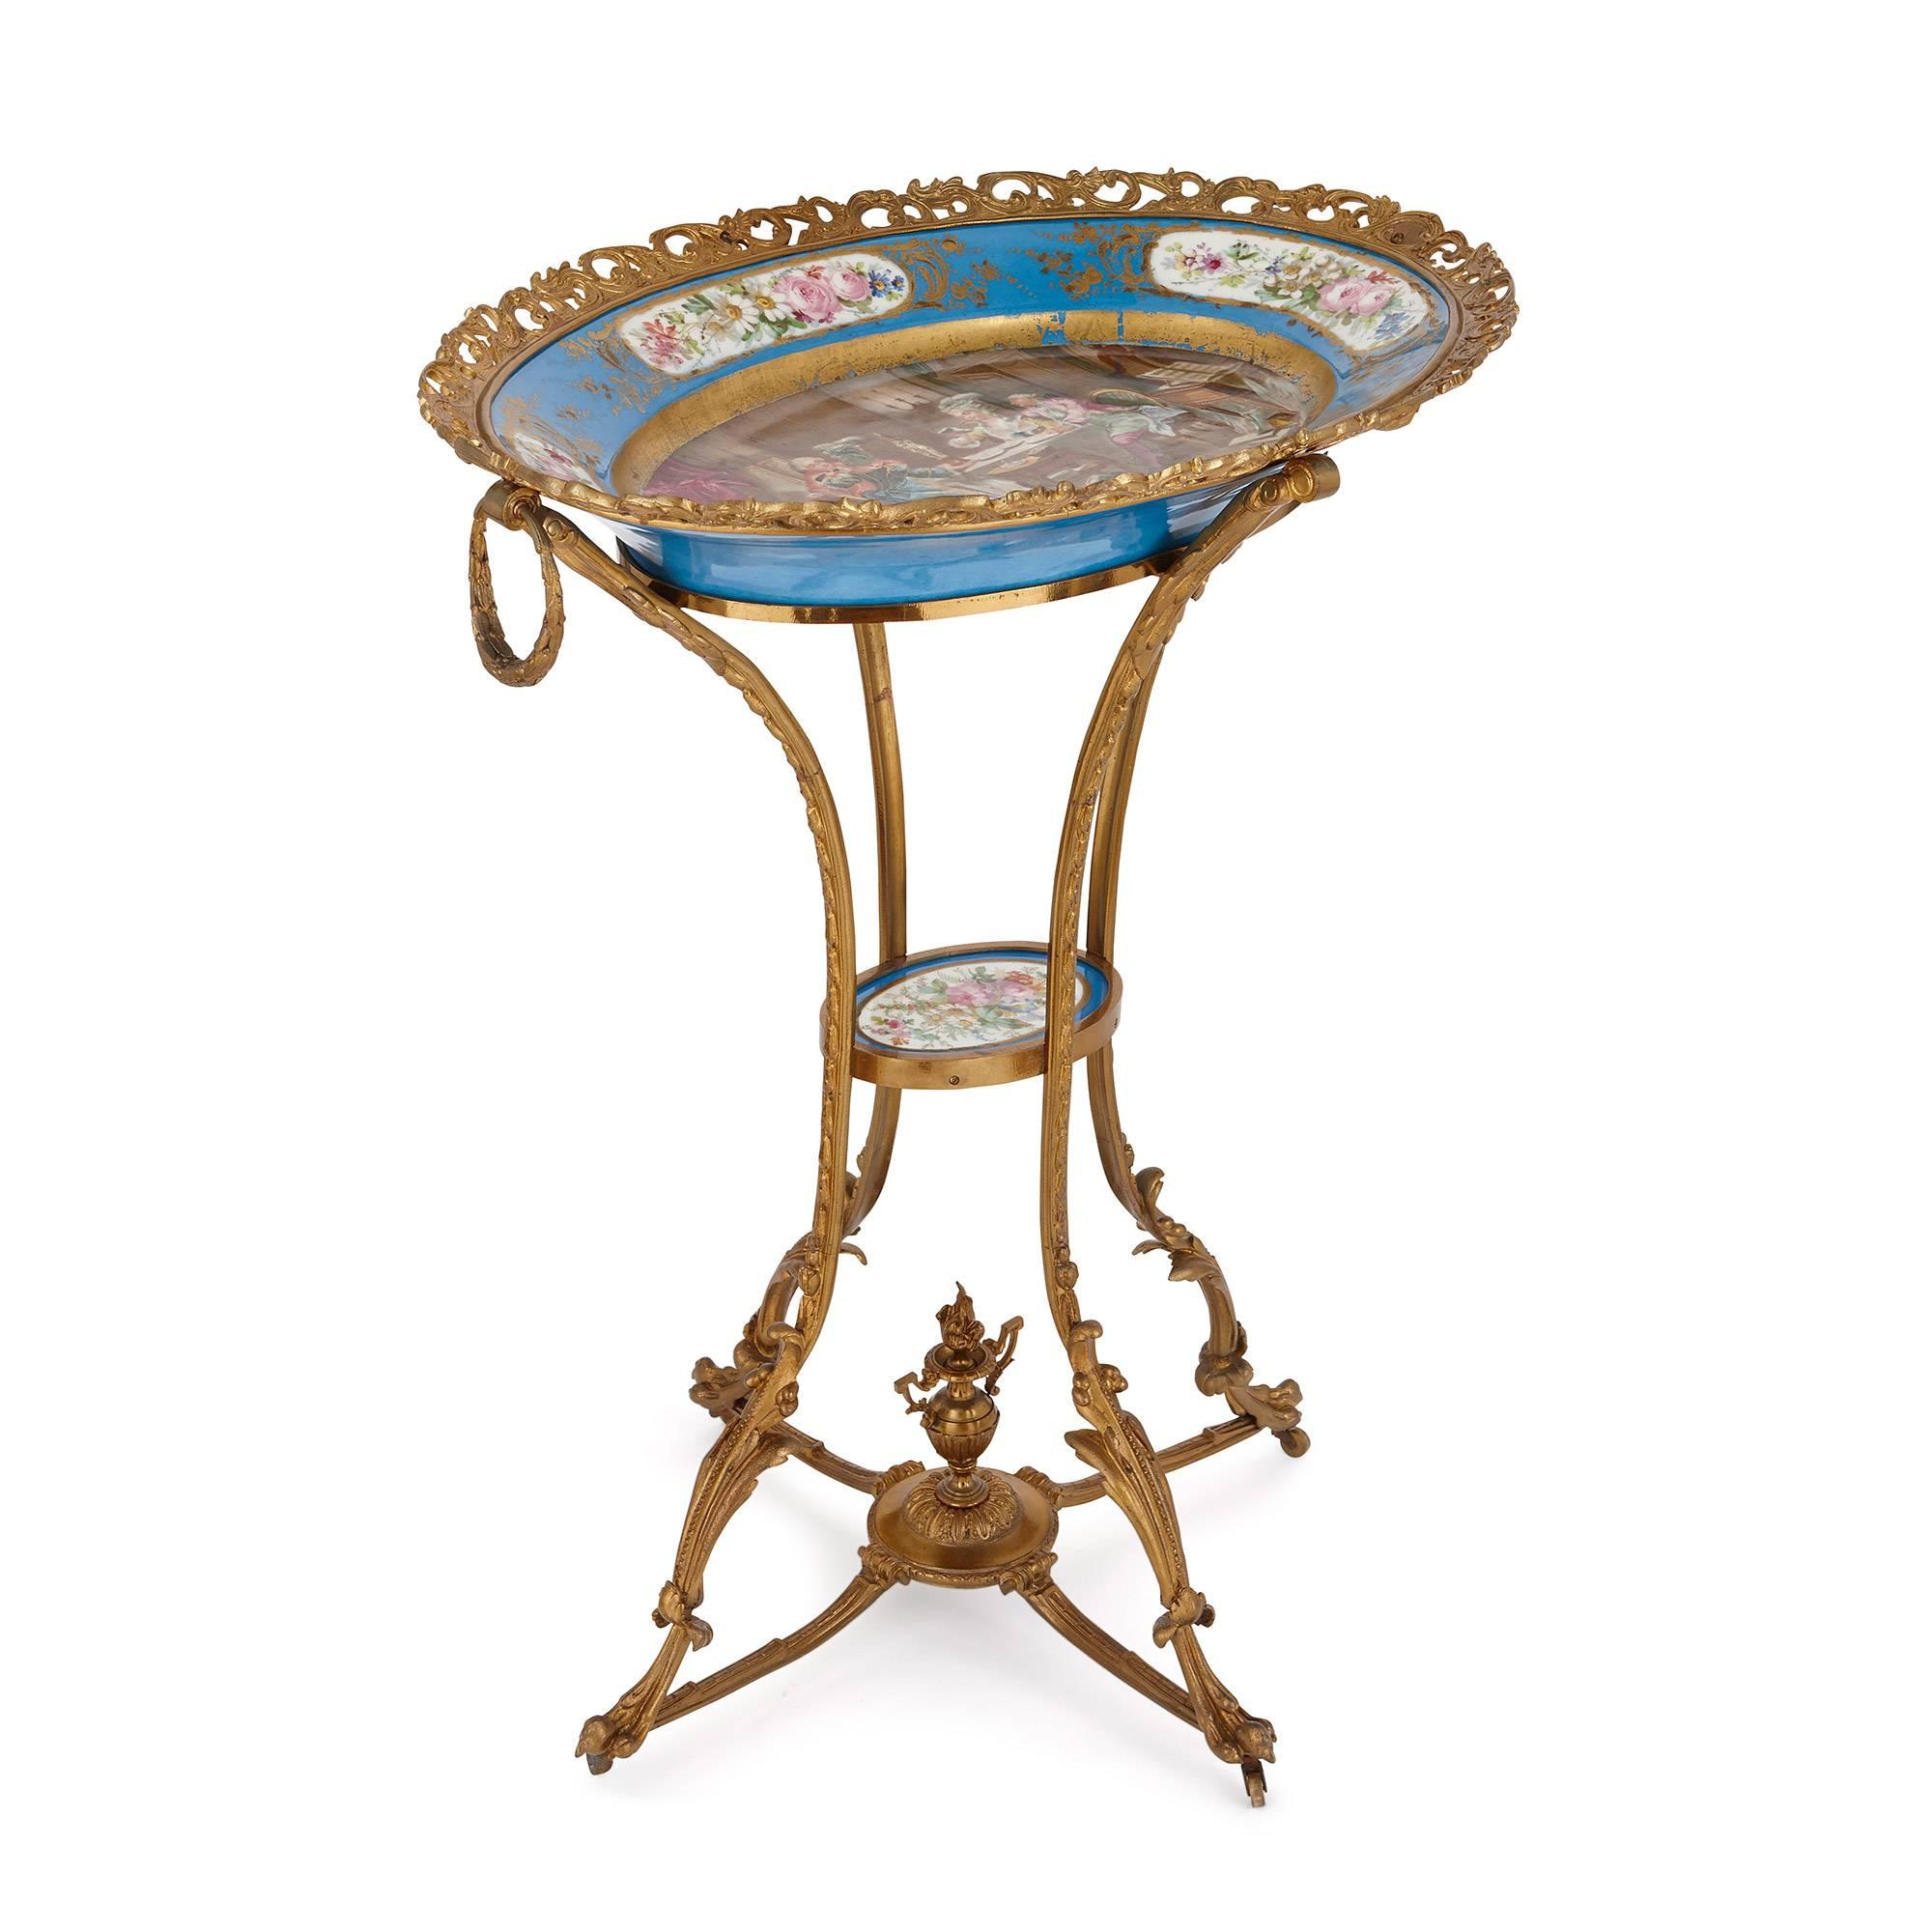 The oval shaped porcelain charger depicting 18th Century aristocratic men and women sat at a table with a floral pattern rim and a pierced ormolu frame, set on four ormolu legs joined in the middle with a porcelain plaque.

This stunning Louis XVI